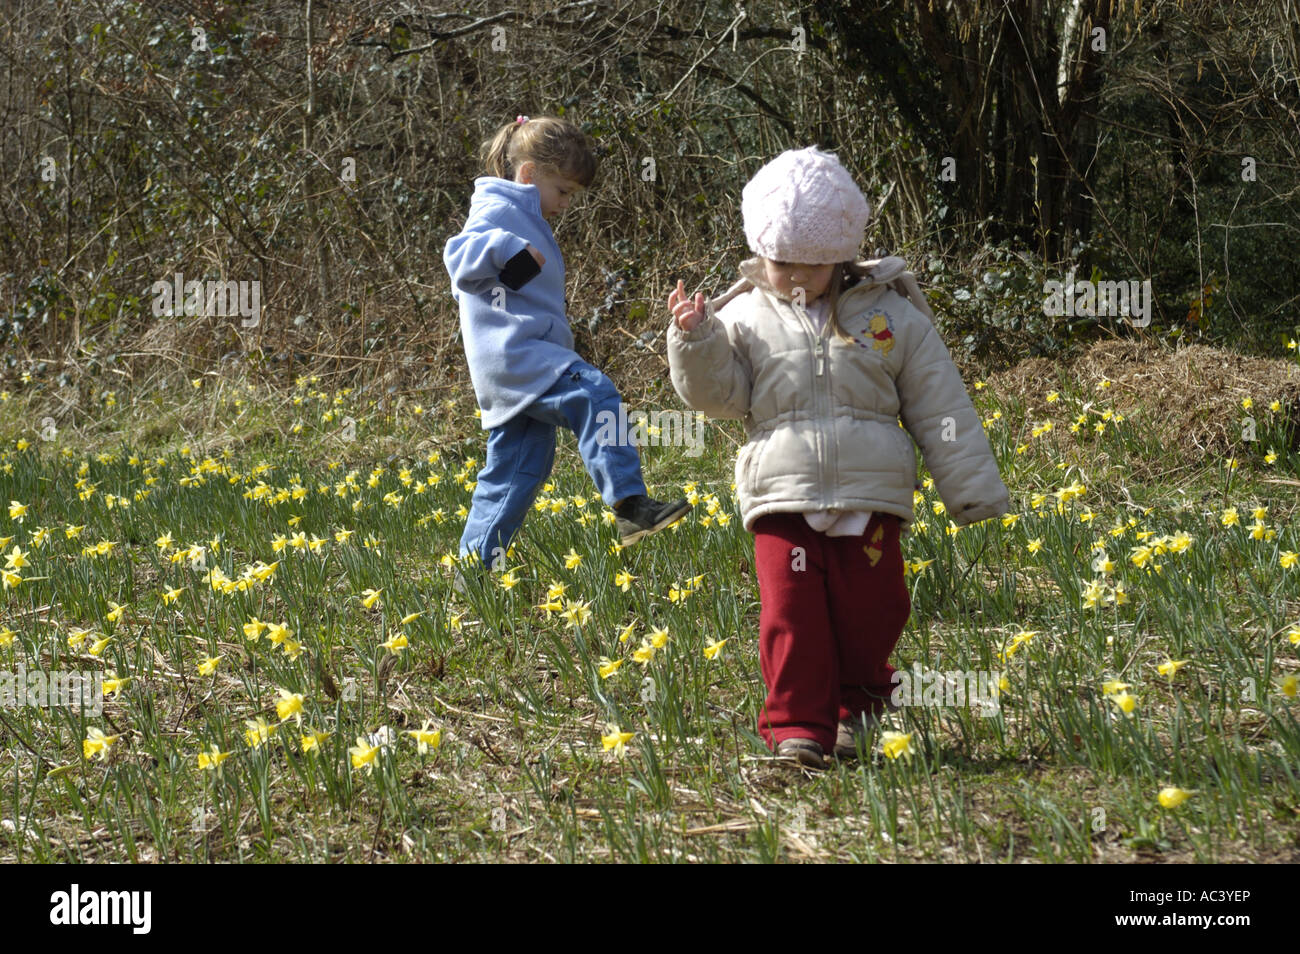 Two young children play in meadow of Wild daffodils in Dunsford Wood Dartmoor National Park devon england Stock Photo